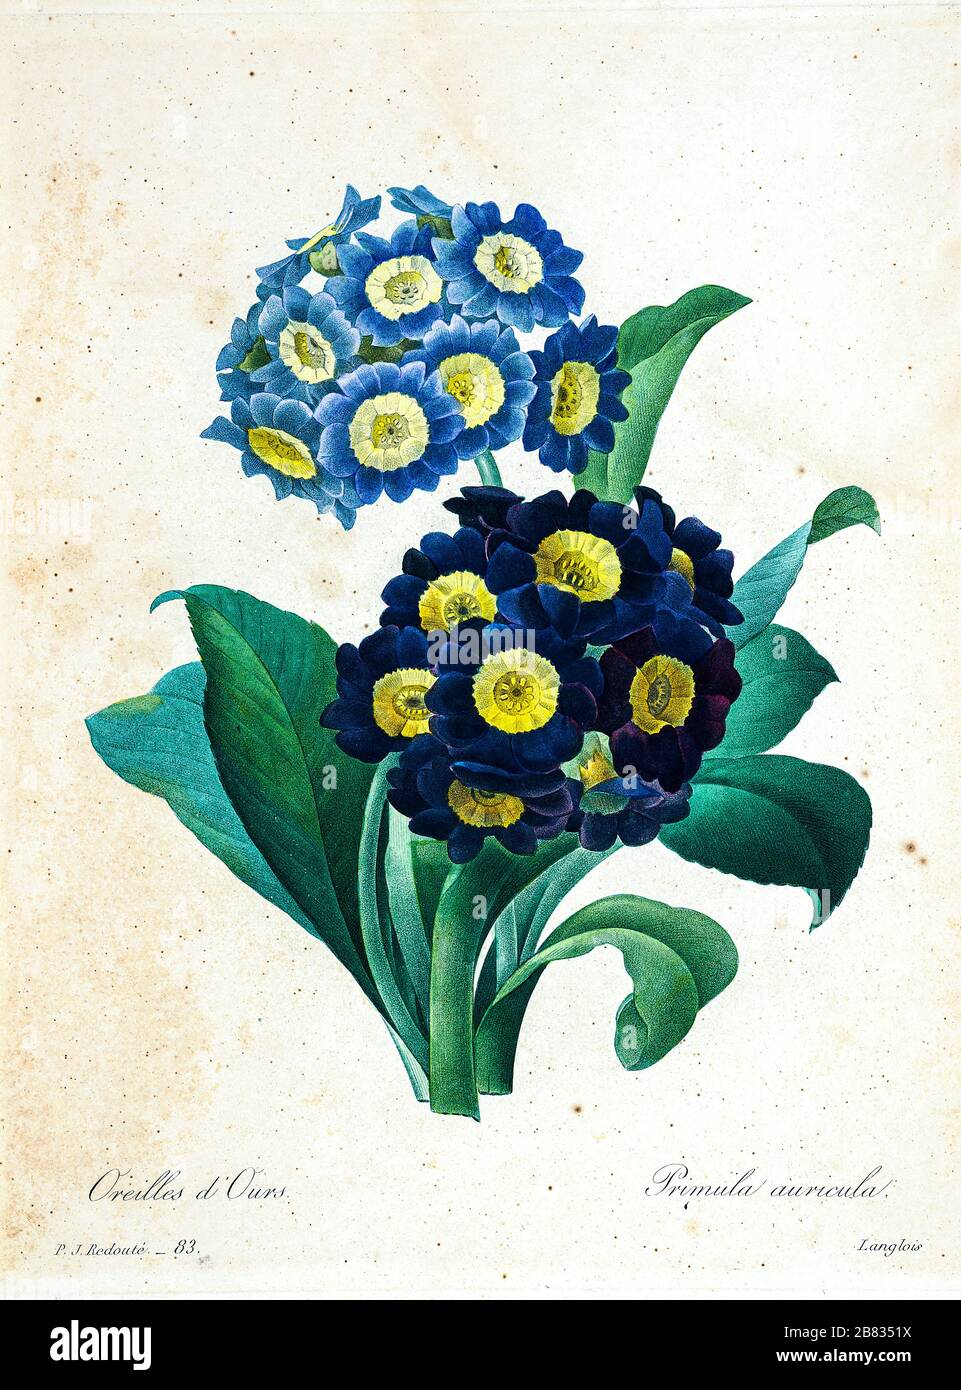 19th-century hand painted Engraving illustration of Primula auricula flowers, often known as auricula, mountain cowslip or bear's ear  flower, by Pierre-Joseph Redoute. Published in Choix Des Plus Belles Fleurs, Paris (1827). by Redouté, Pierre Joseph, 1759-1840.; Chapuis, Jean Baptiste.; Ernest Panckoucke.; Langois, Dr.; Bessin, R.; Victor, fl. ca. 1820-1850. Stock Photo